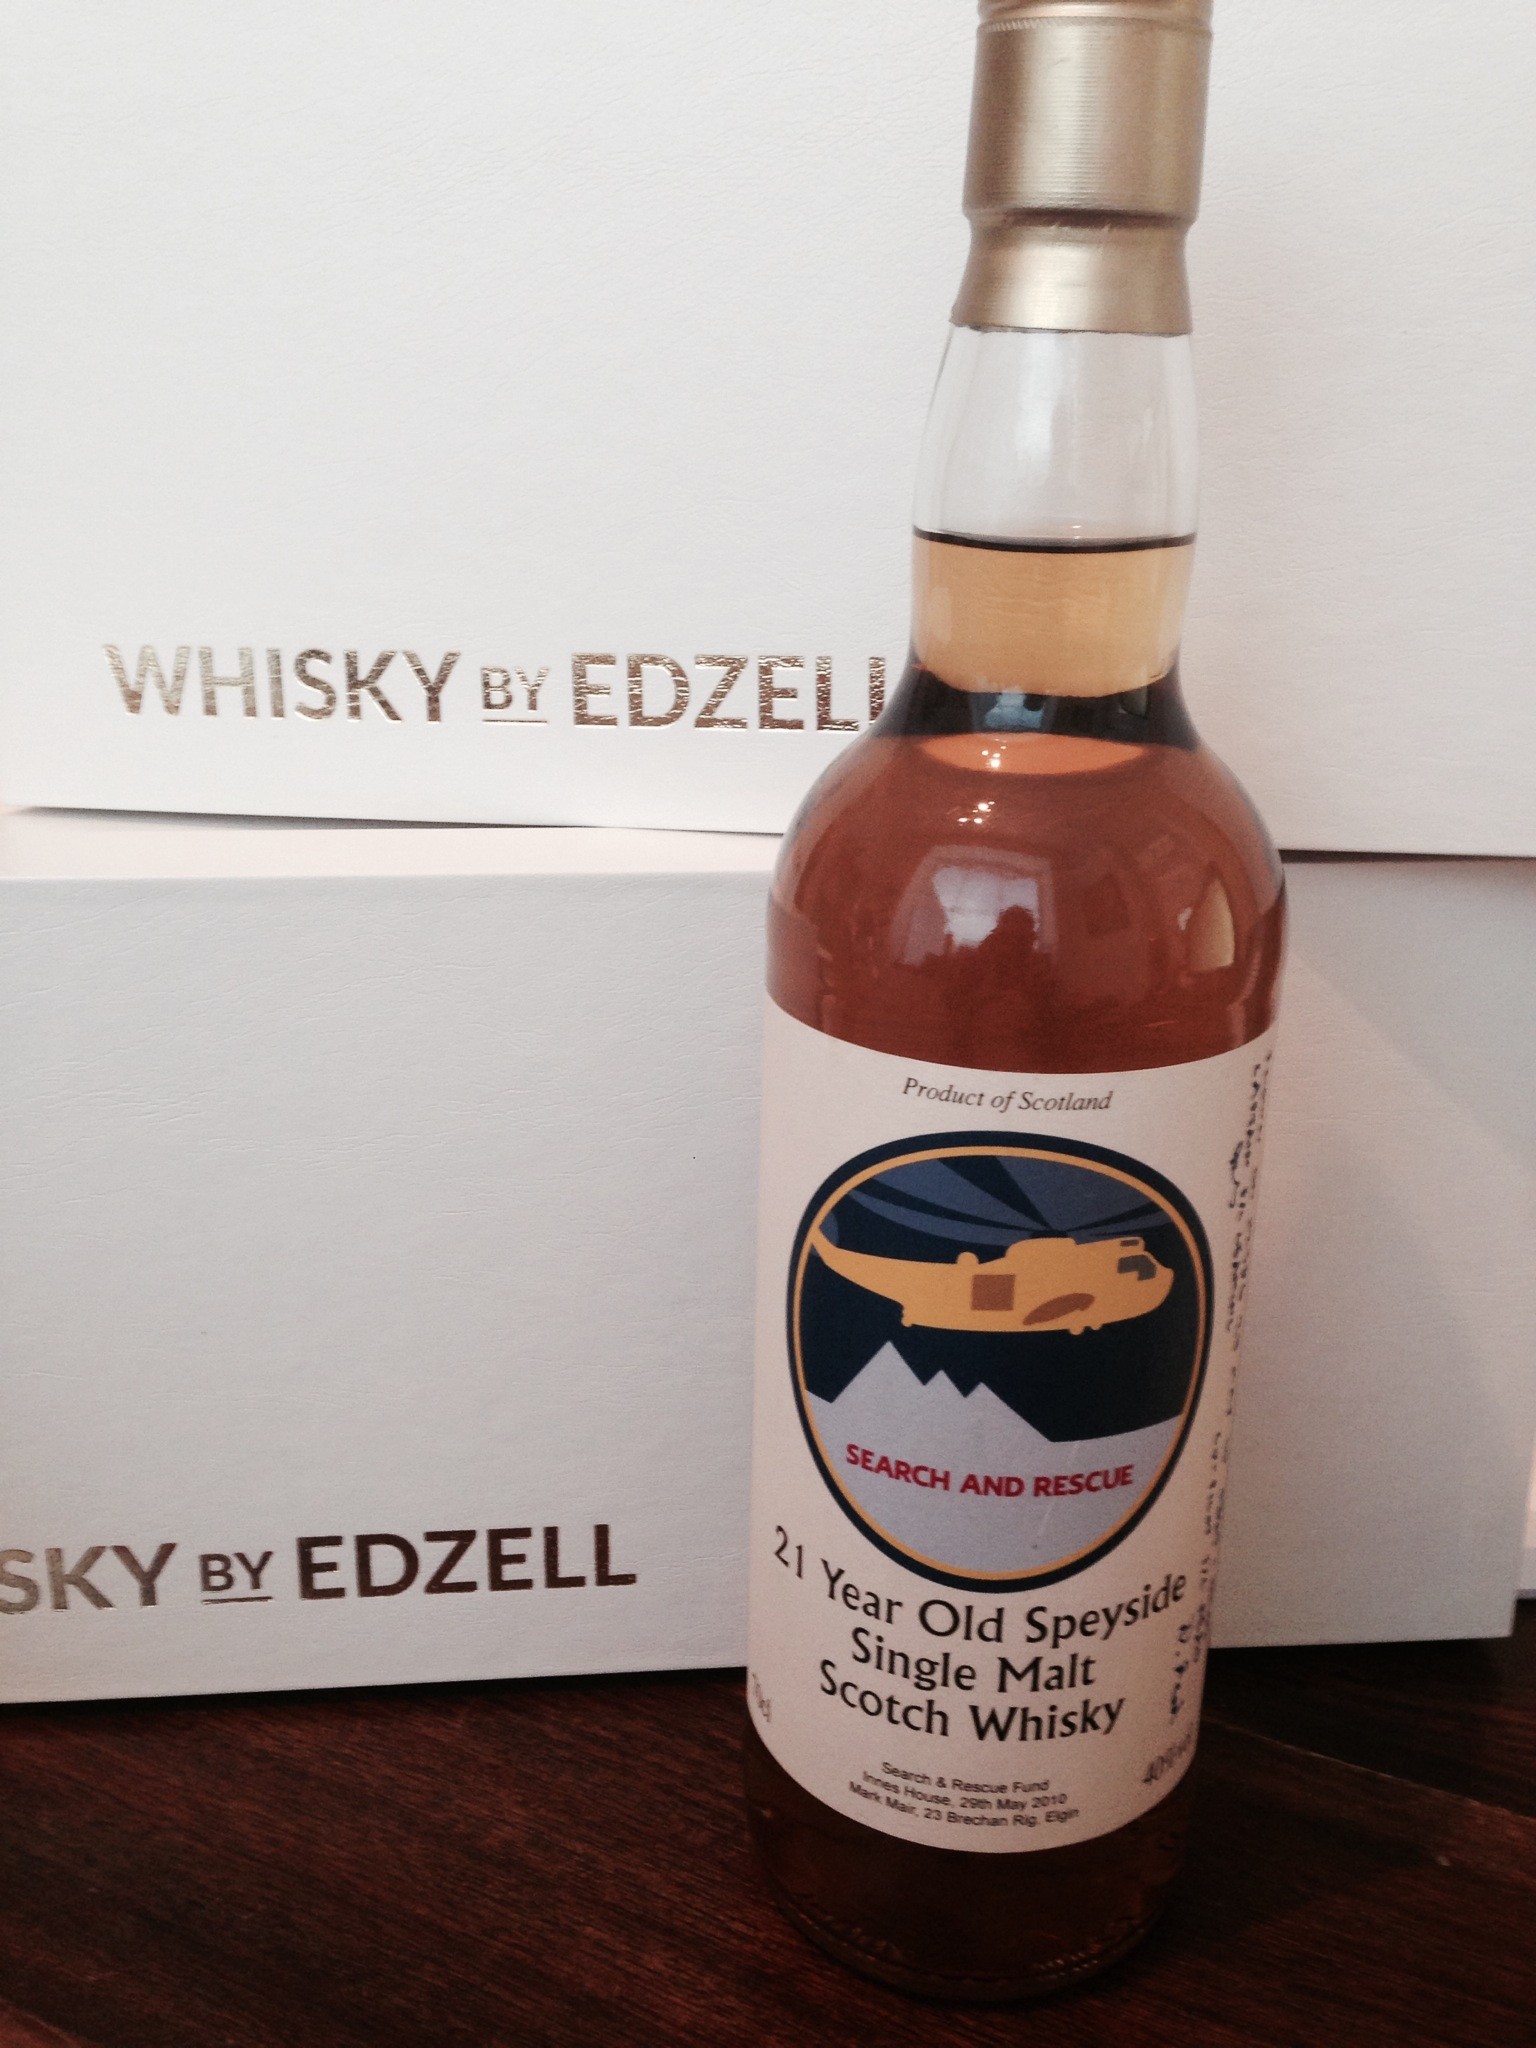 21 year old Speyside single malt (Search & Rescue) signed